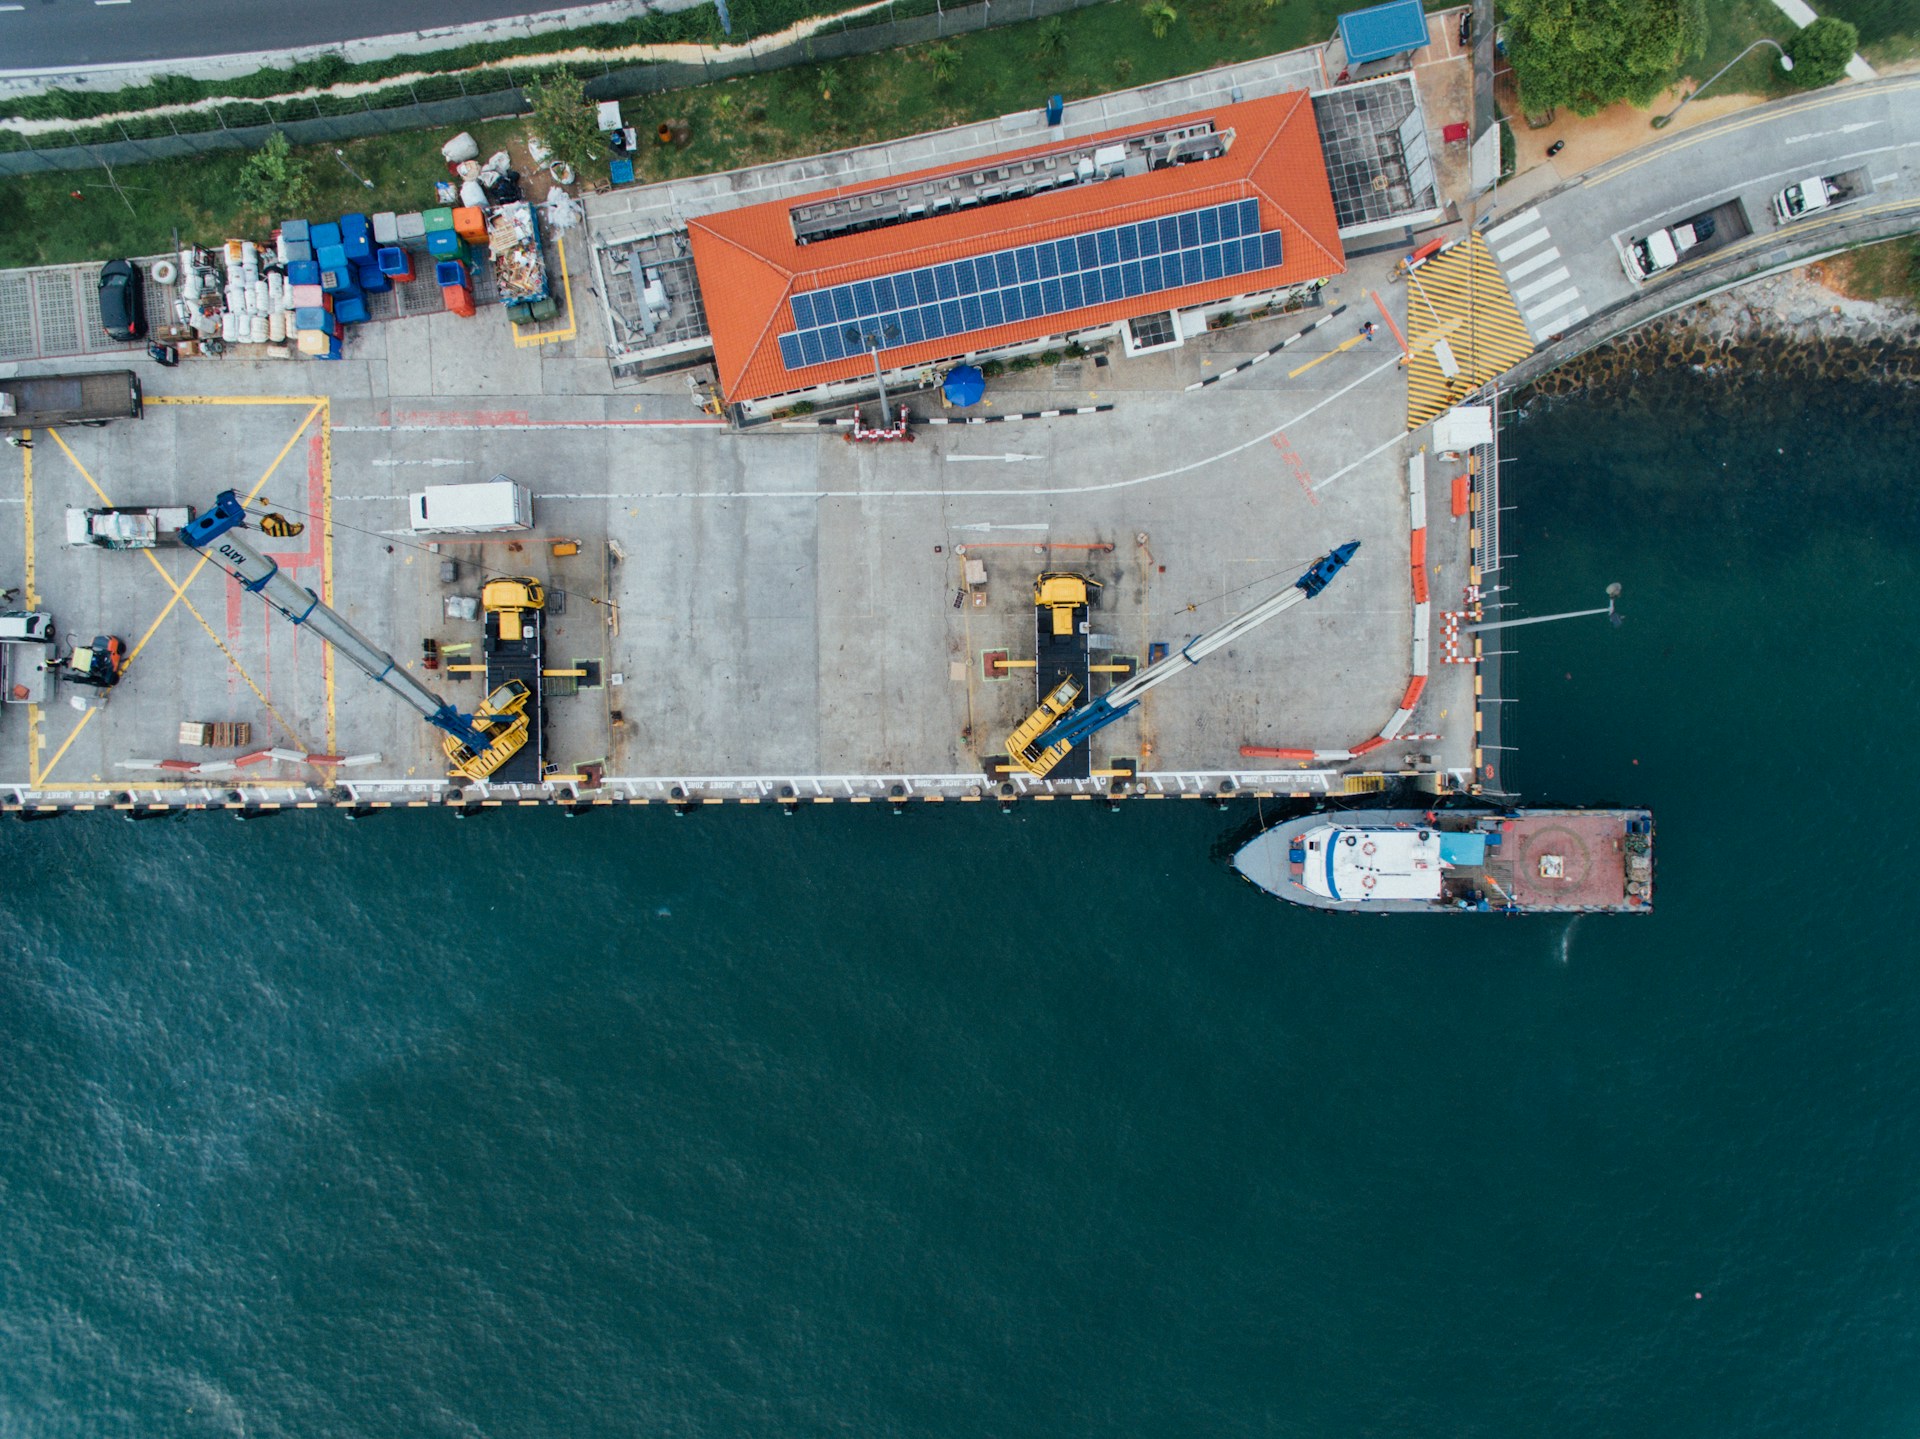 Aerial view of a shipyard